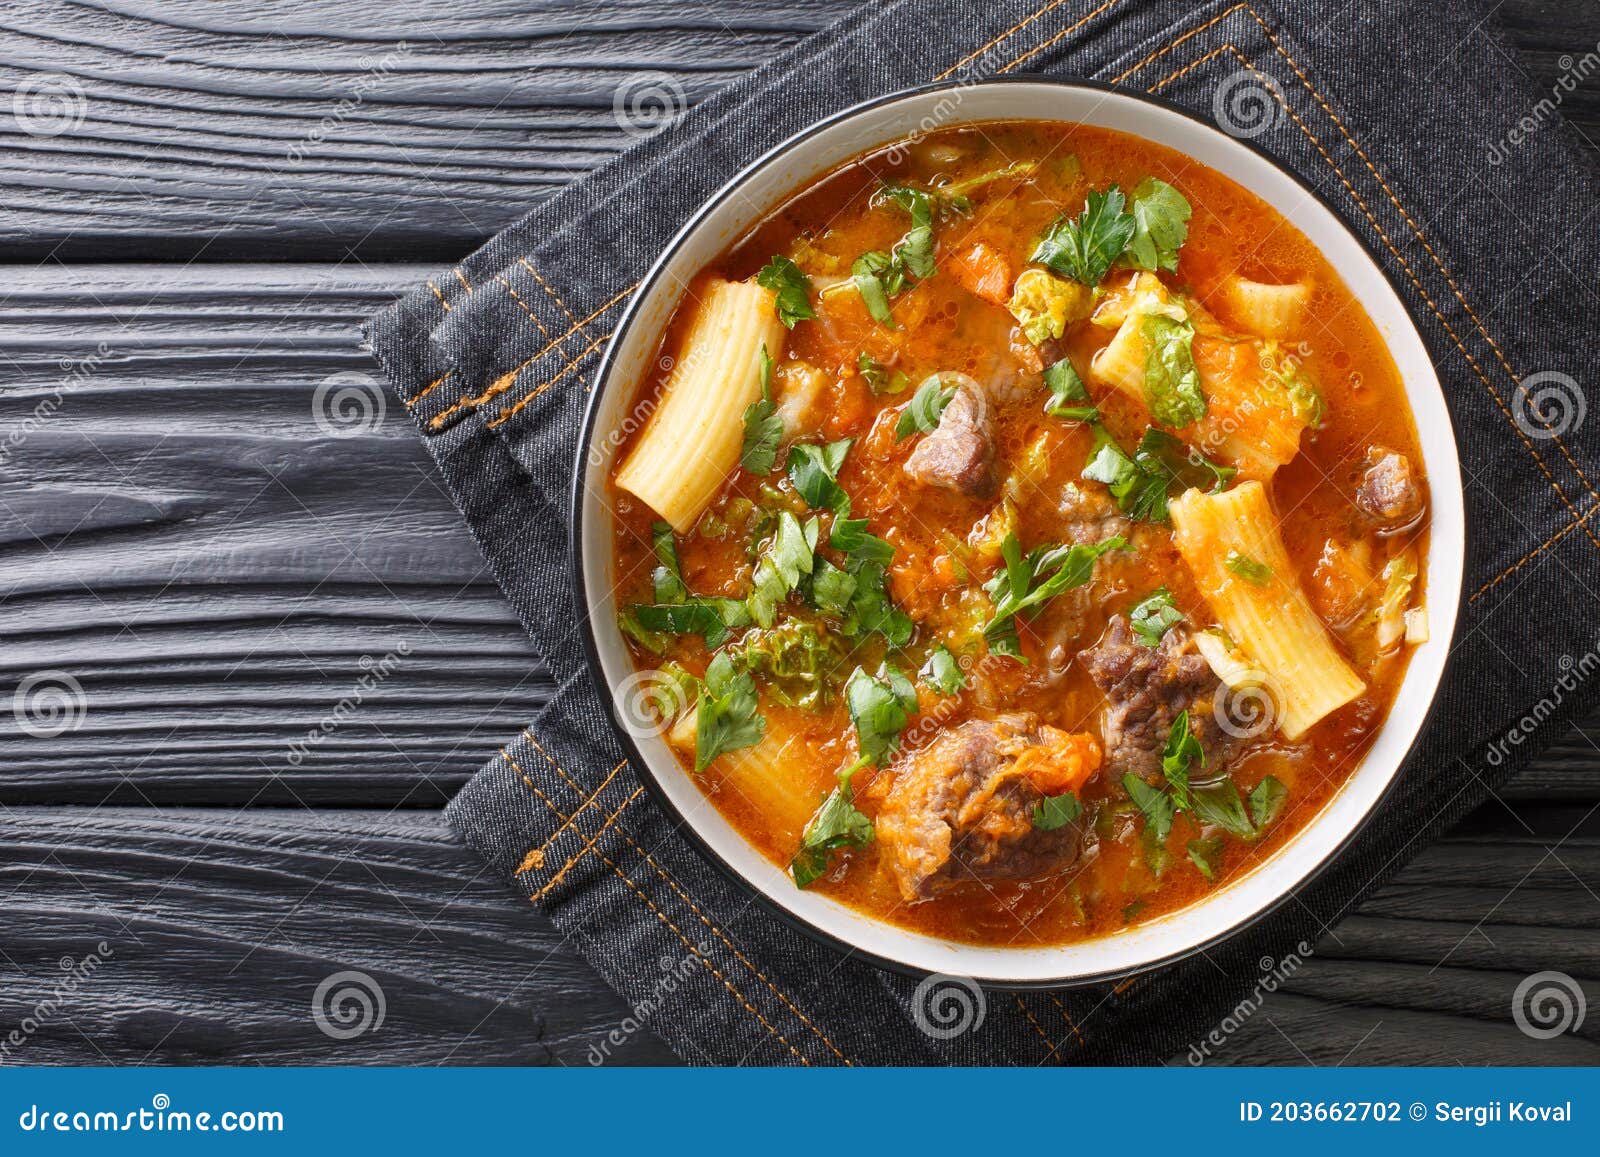 Soup Joumou or Haitian Beef and Pumpkin Soup is a Famous Mildly Spicy ...